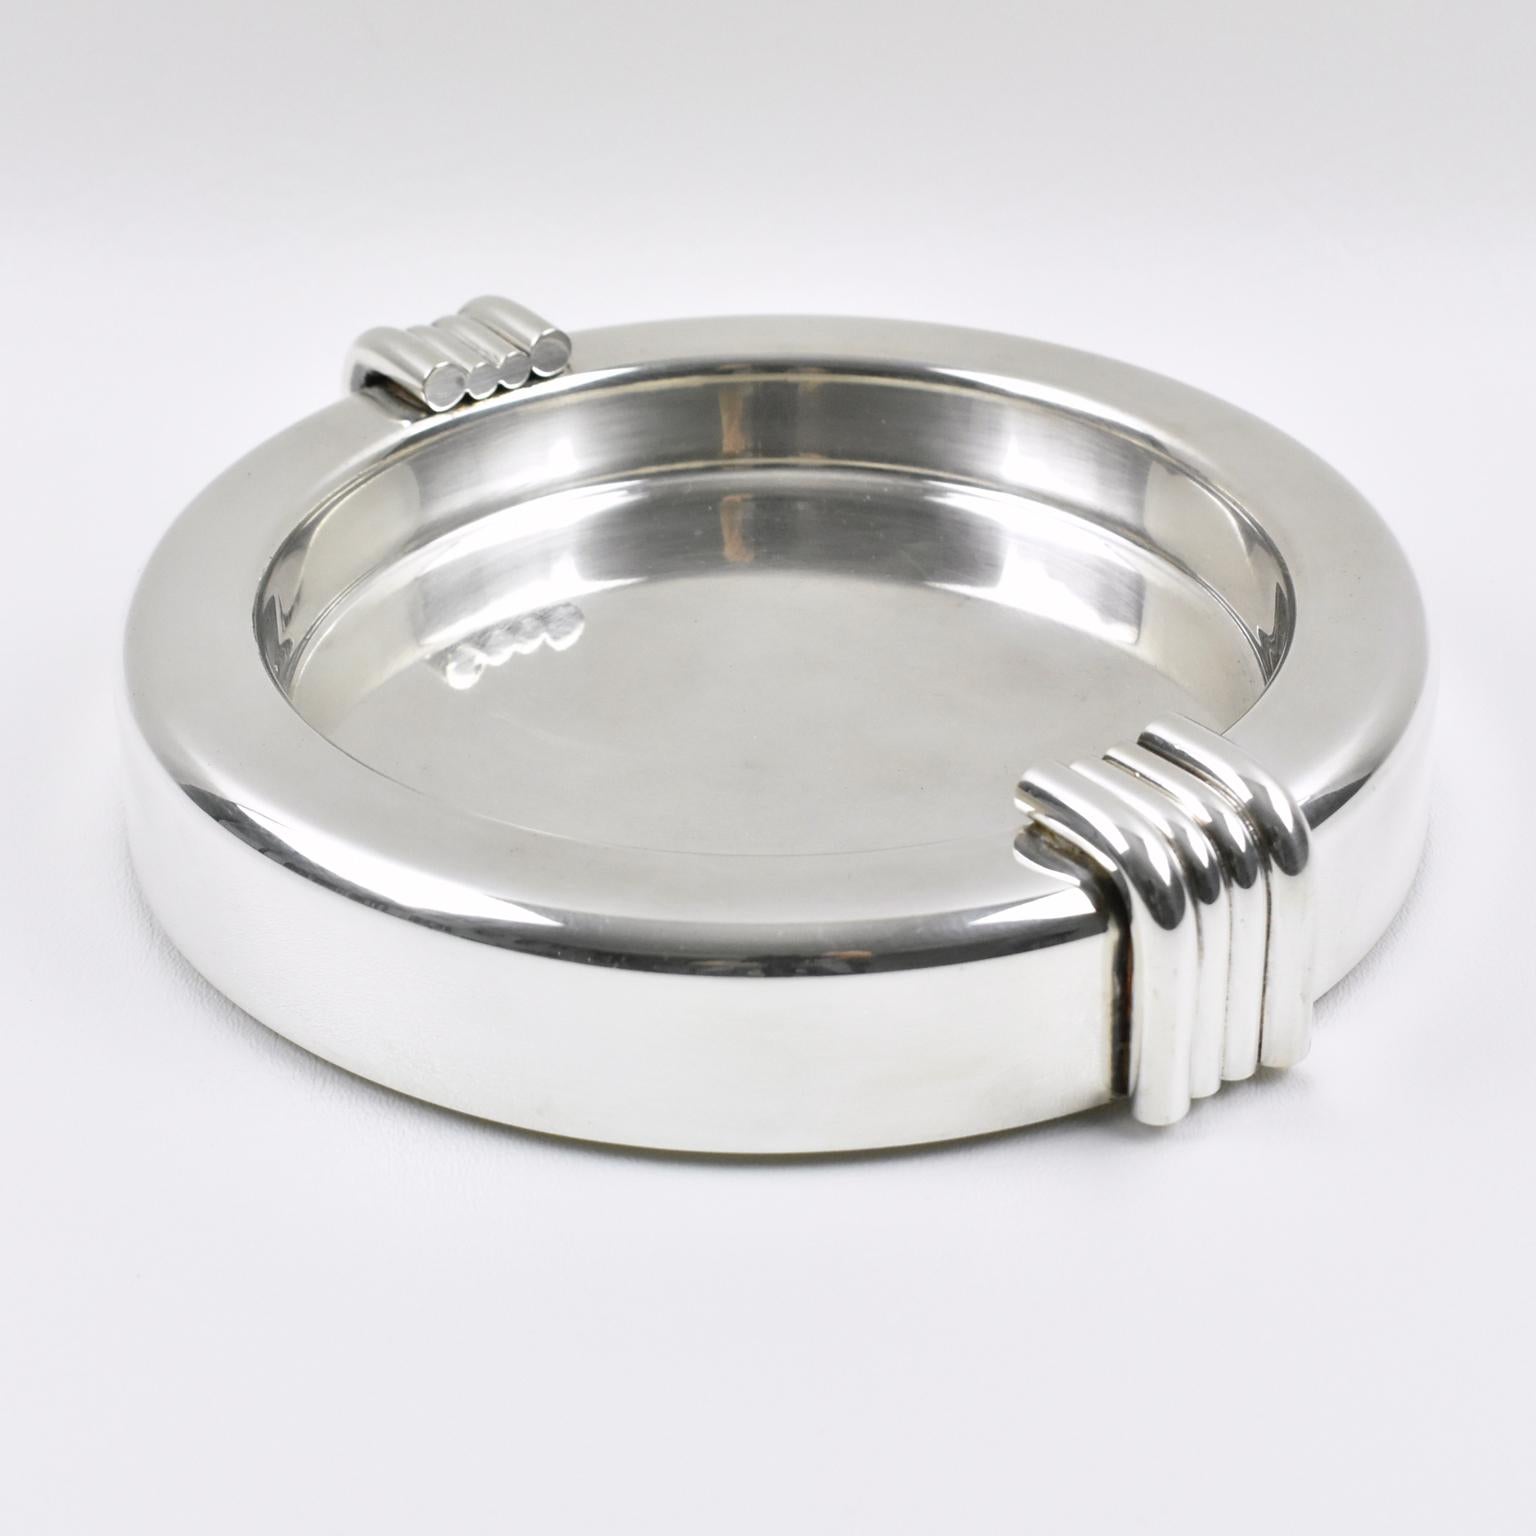 Christian Dior Modernist Silver Plate Large Cigar Ashtray Desk Tidy Catchall 1